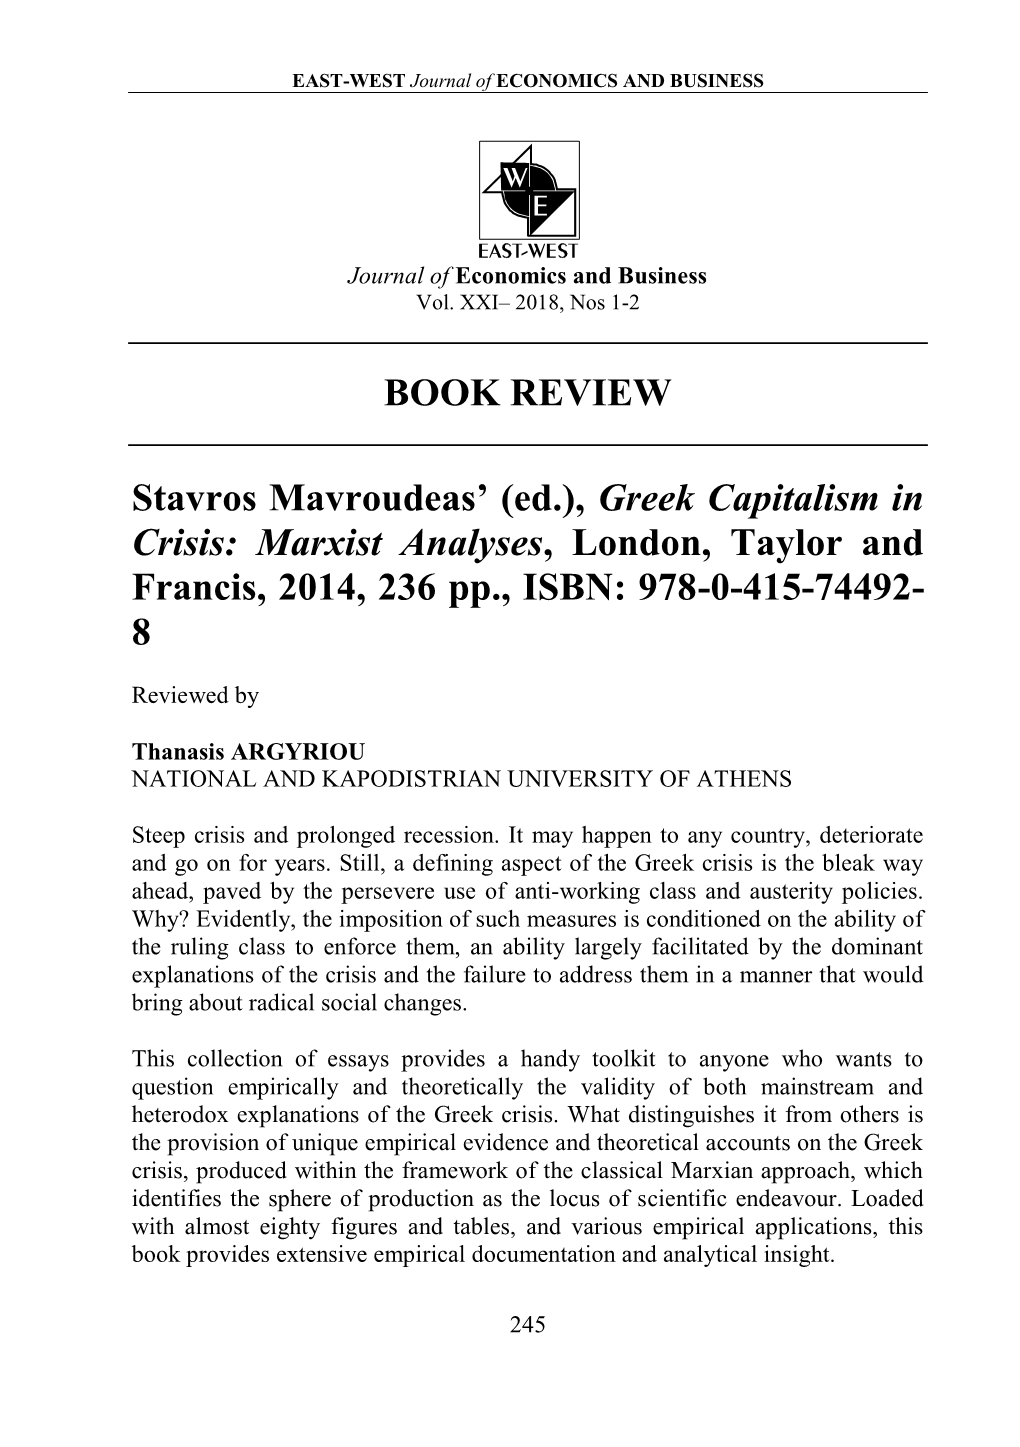 BOOK REVIEW Stavros Mavroudeas' (Ed.), Greek Capitalism in Crisis